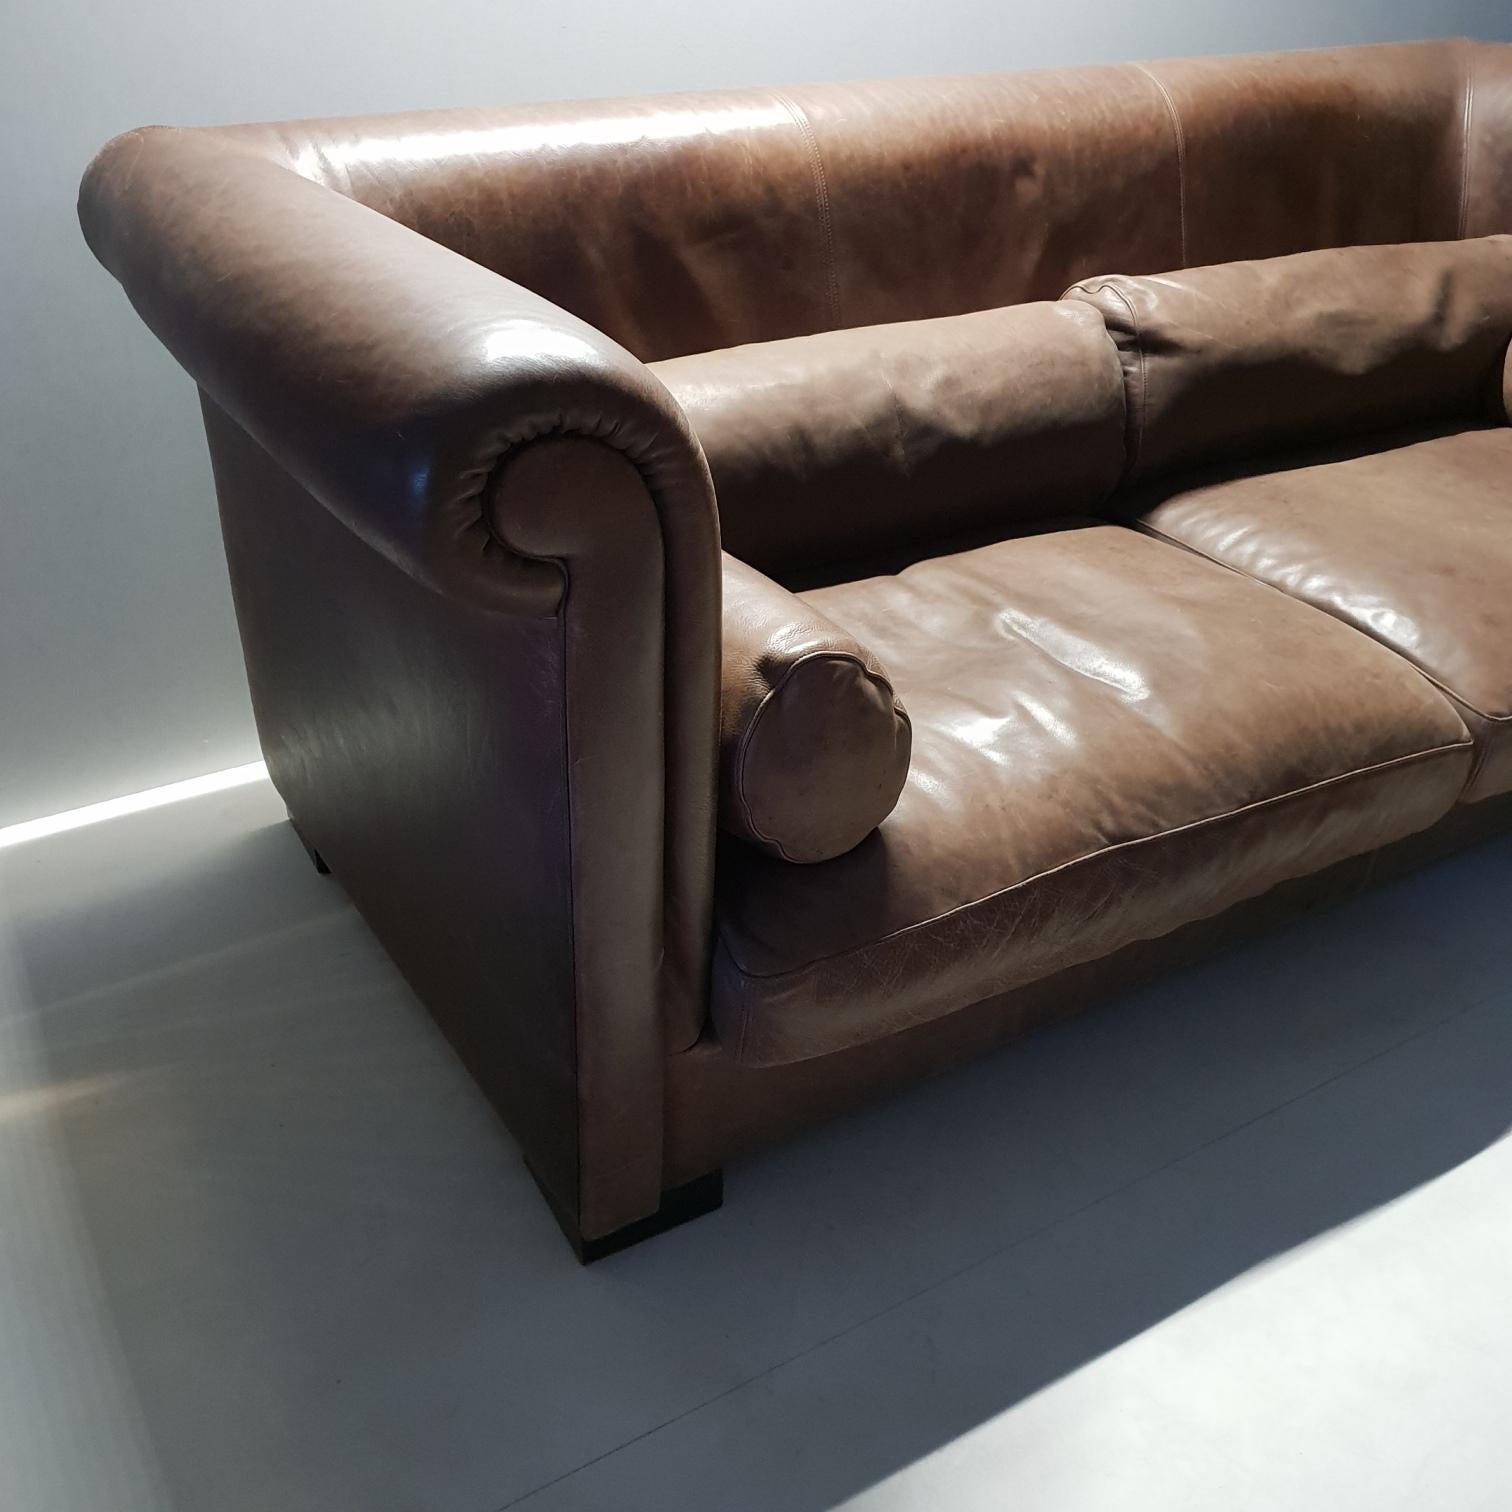 Industrial brown leather 3-seat sofa model Alfred P.
Designed by Marco Milisich for Baxter.
Thick and high quality leather.